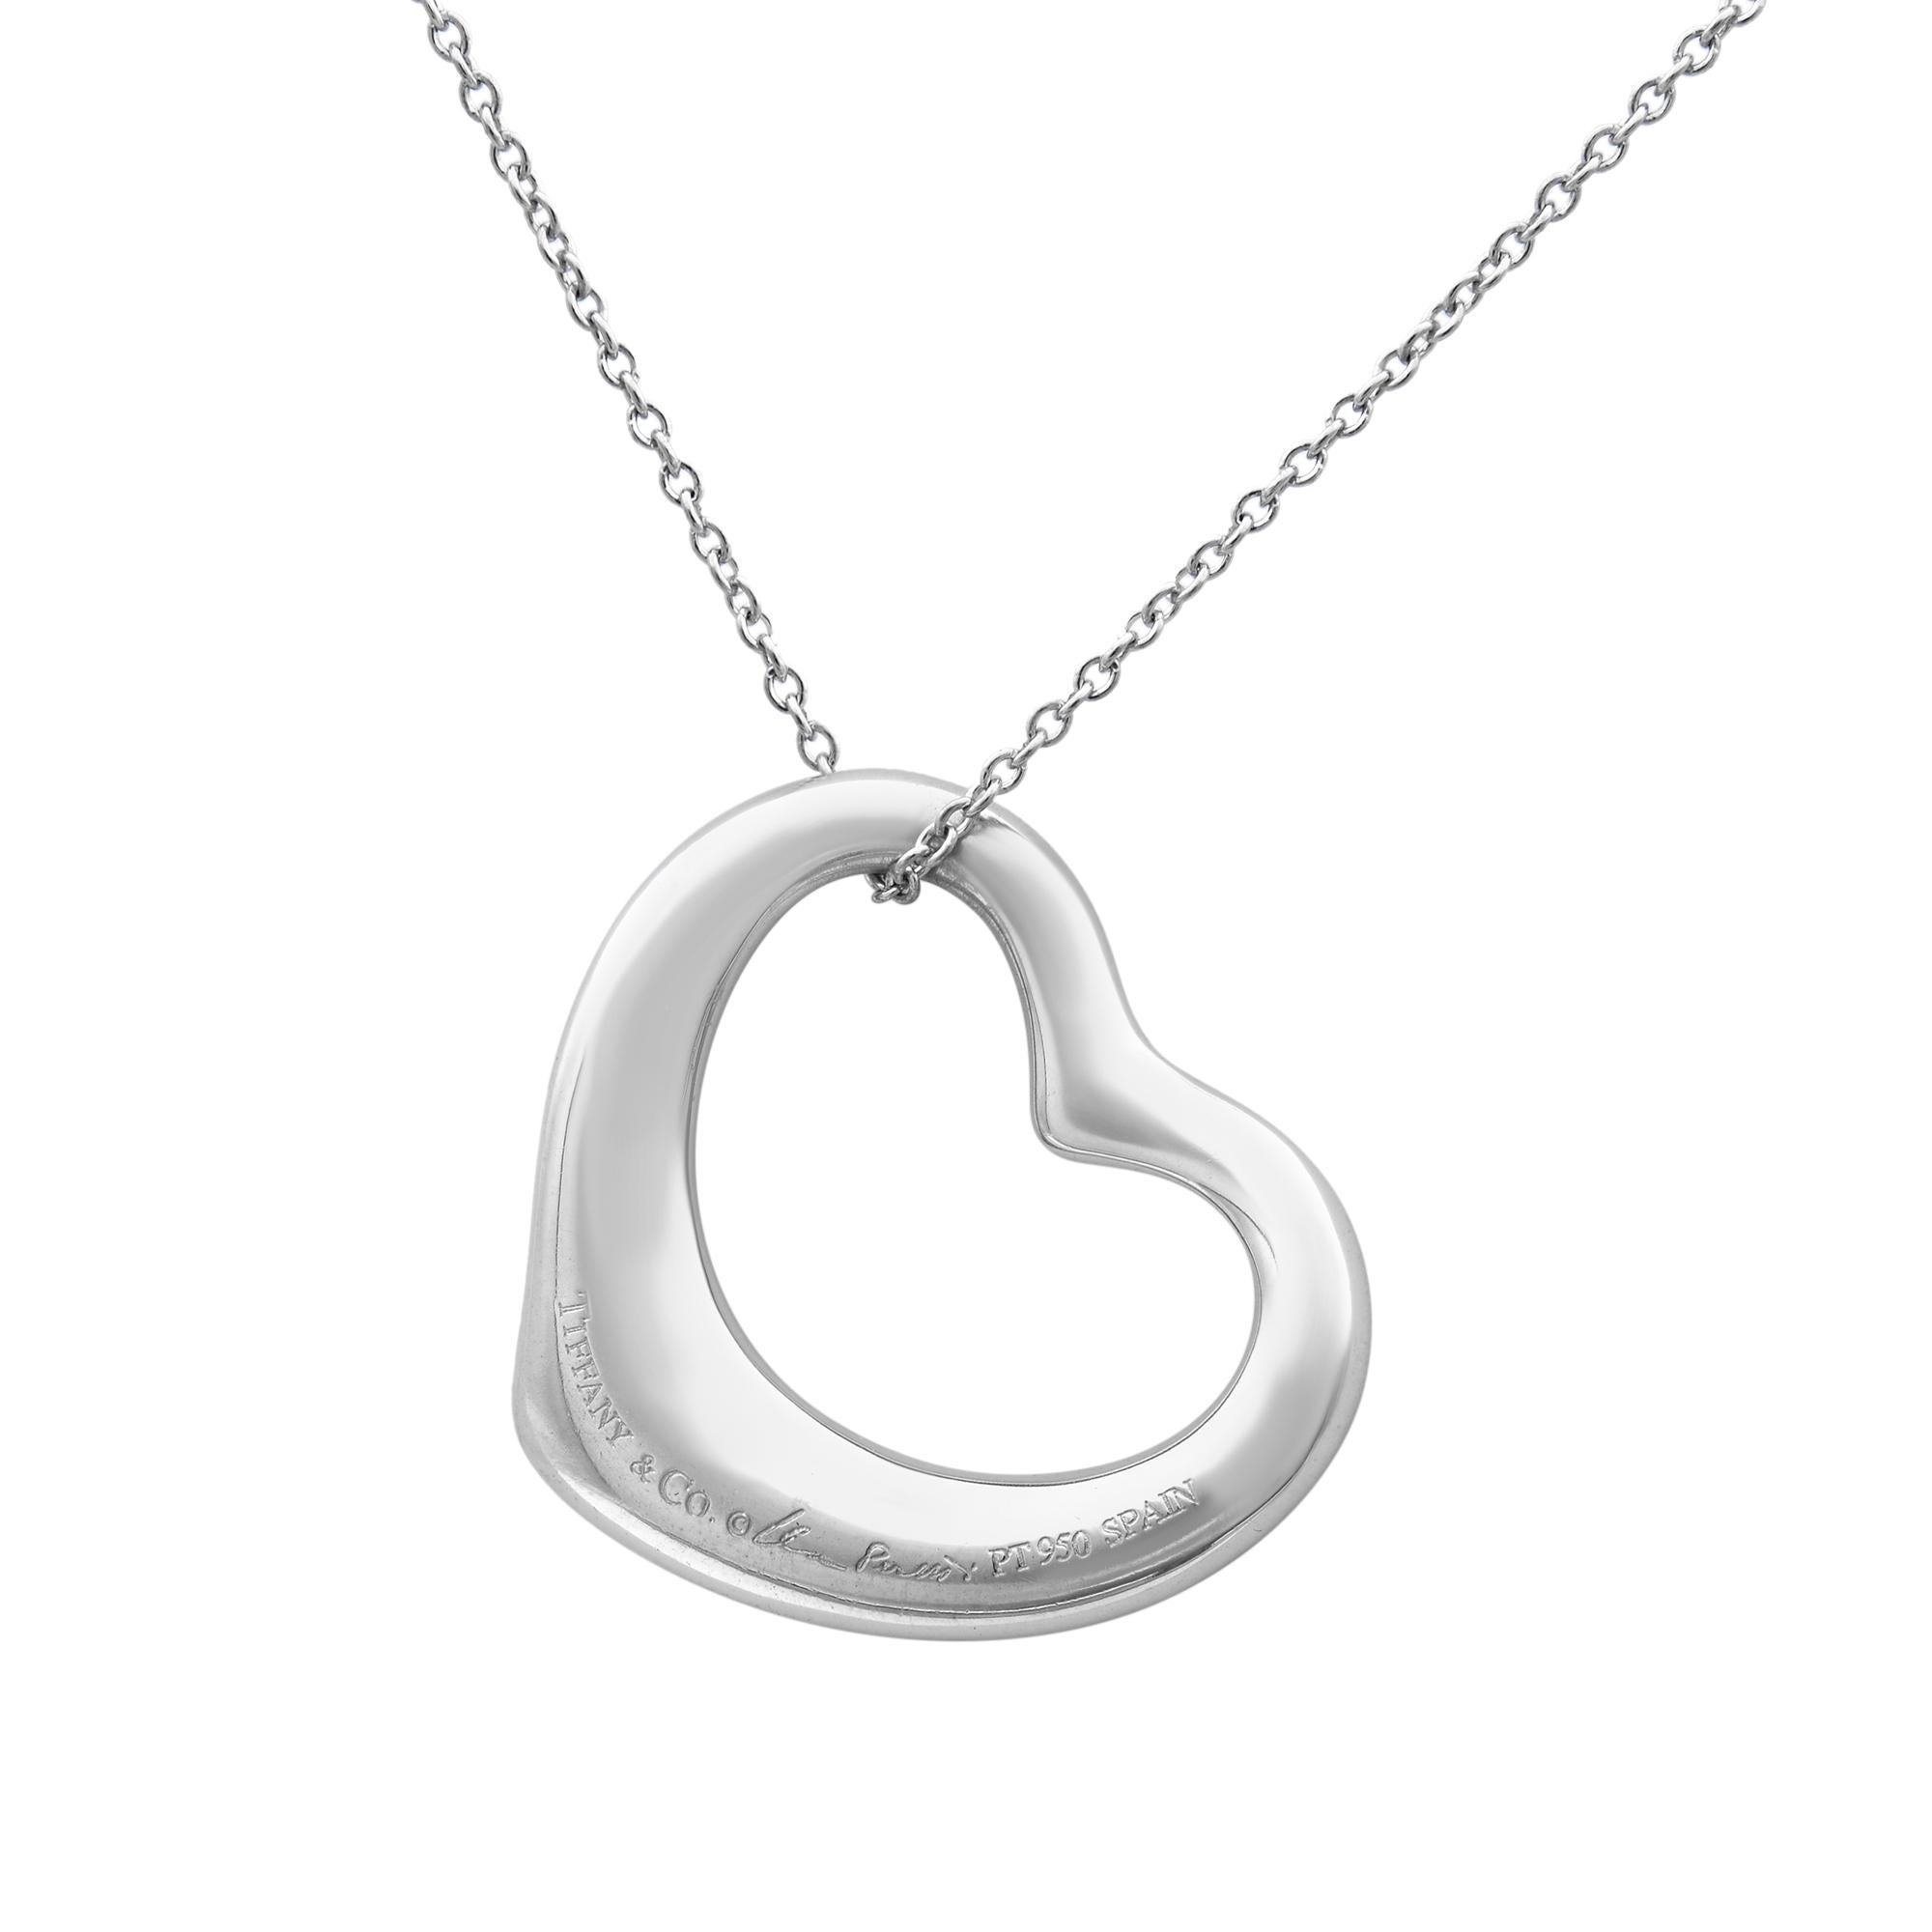 Tiffany & Co platinum with pavé diamonds heart shape pendant from Elsa Peretti collection. Open Heart designs celebrates the spirit of love. Dazzling diamonds accentuate the beautiful curves of this pendant. Totaling with 0.95cts of round cut